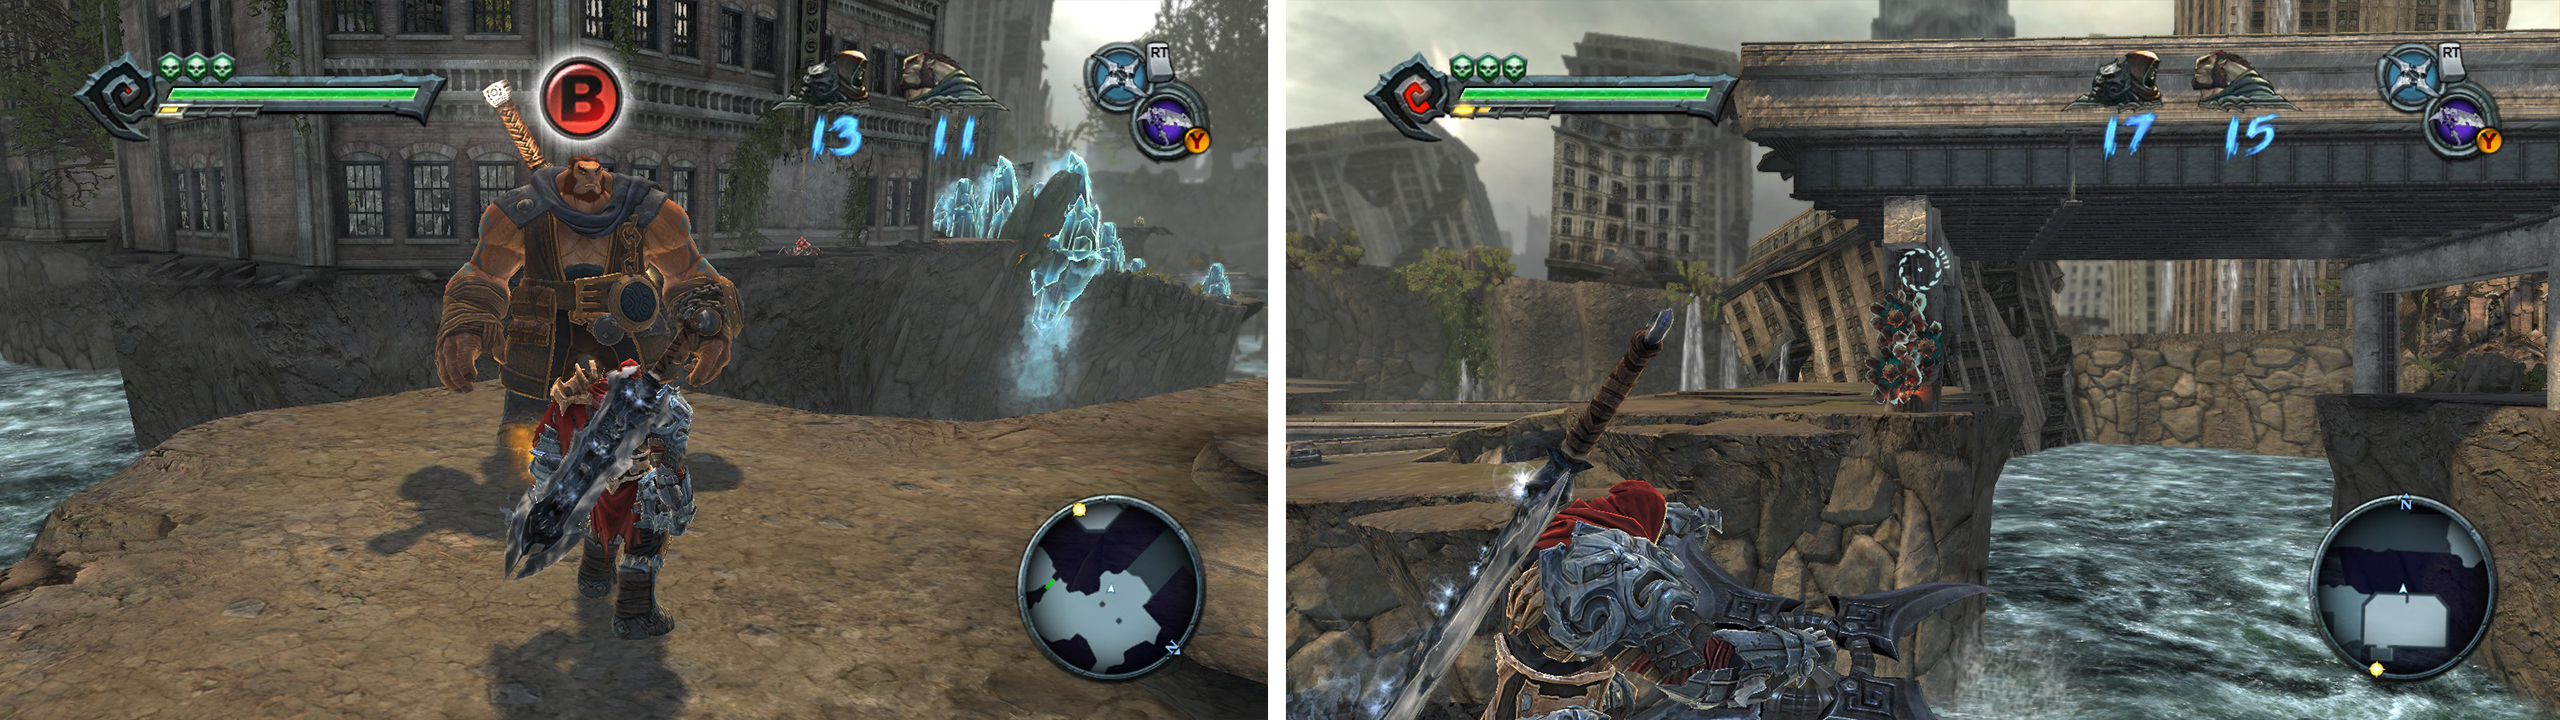 Let Ulthane toss you across the gap (left). Hit the bombs on the bridge to allow Ulthane to proceed (right).